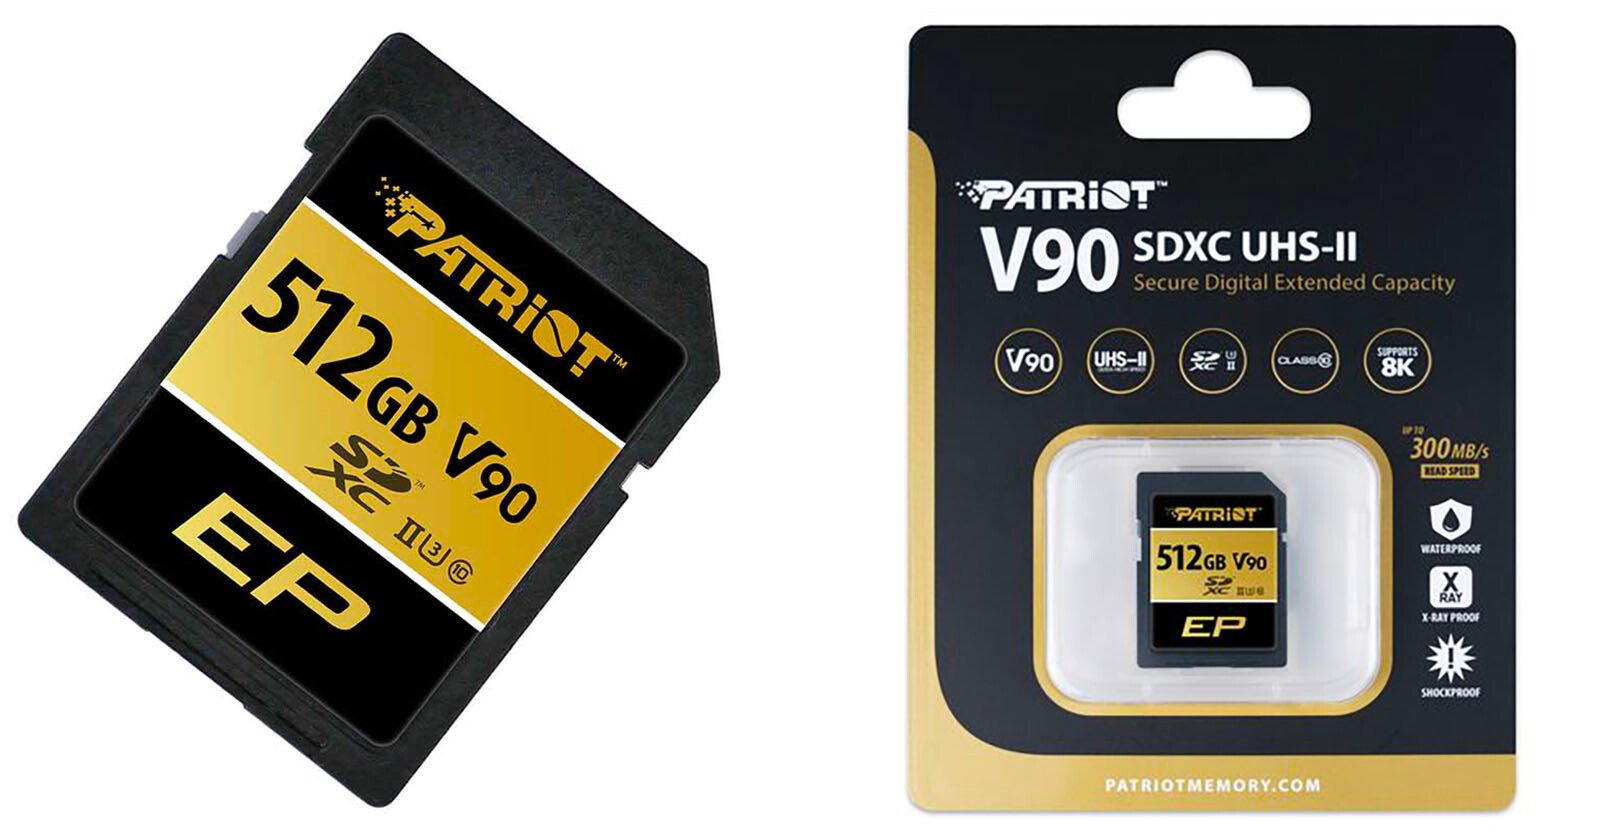  patriot launches 512gb v90 uhs-ii card 400 